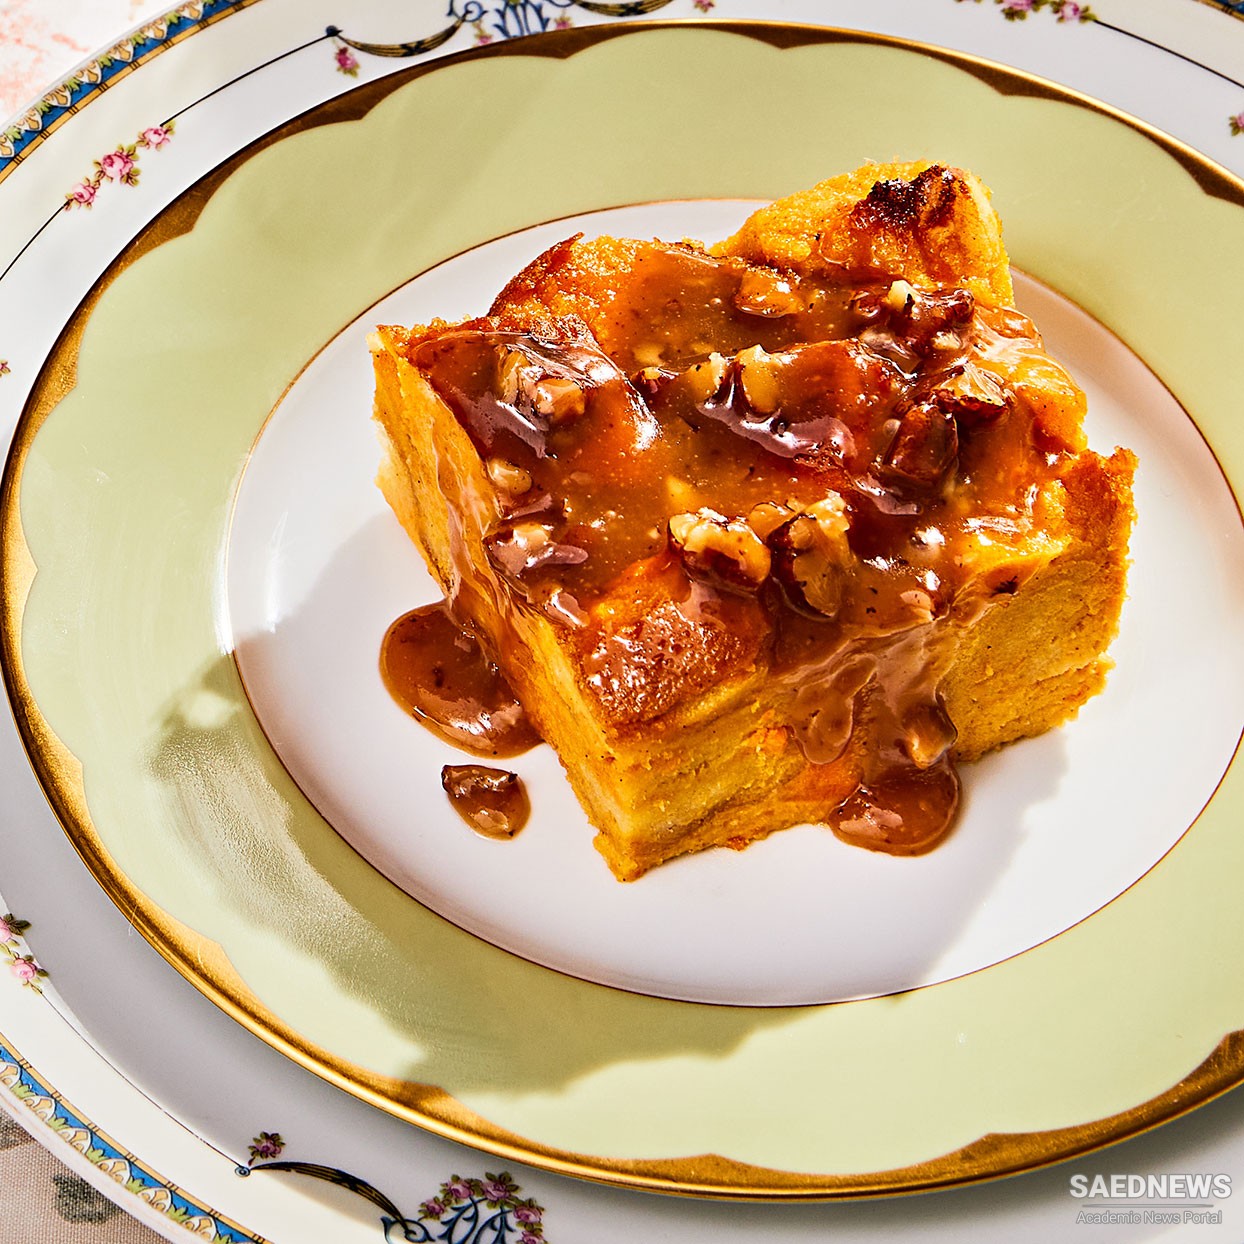 Sweet Potato Bread Pudding With Dates and Pecans